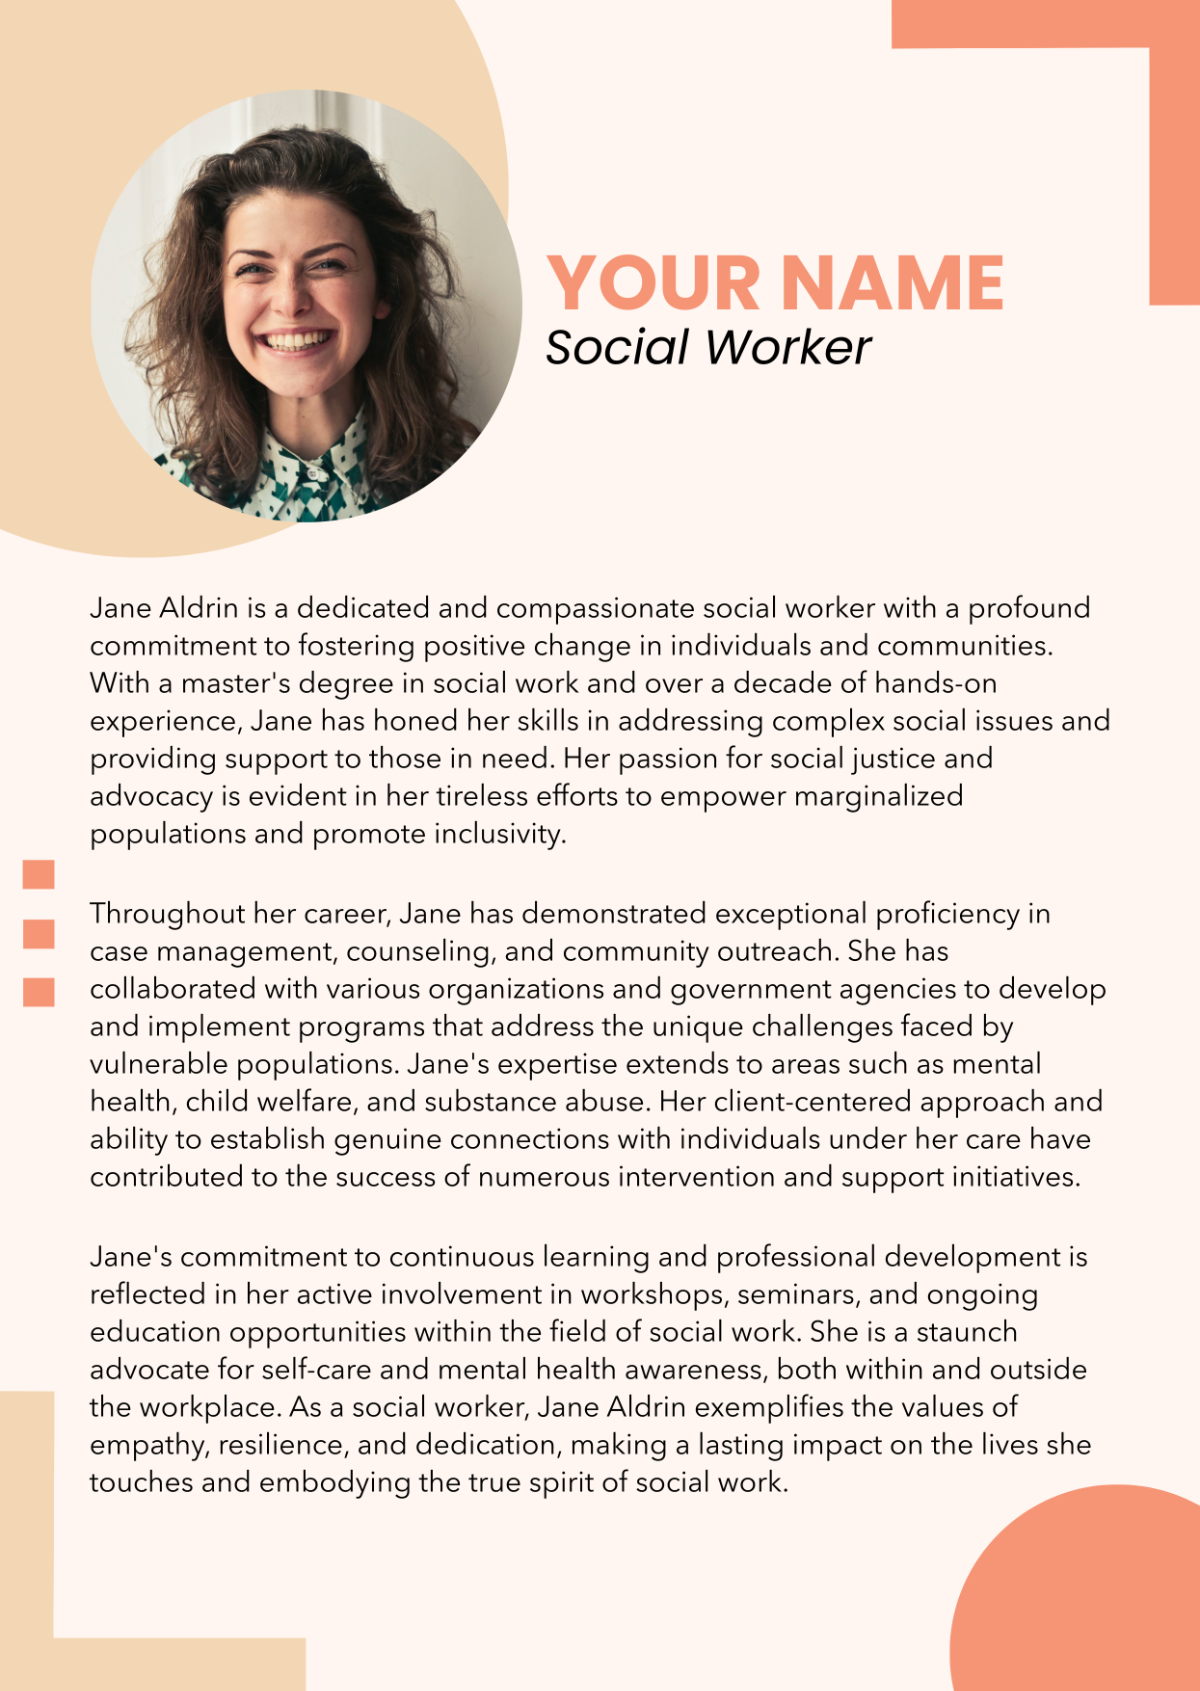 Free Professional Bio for Social Workers Template